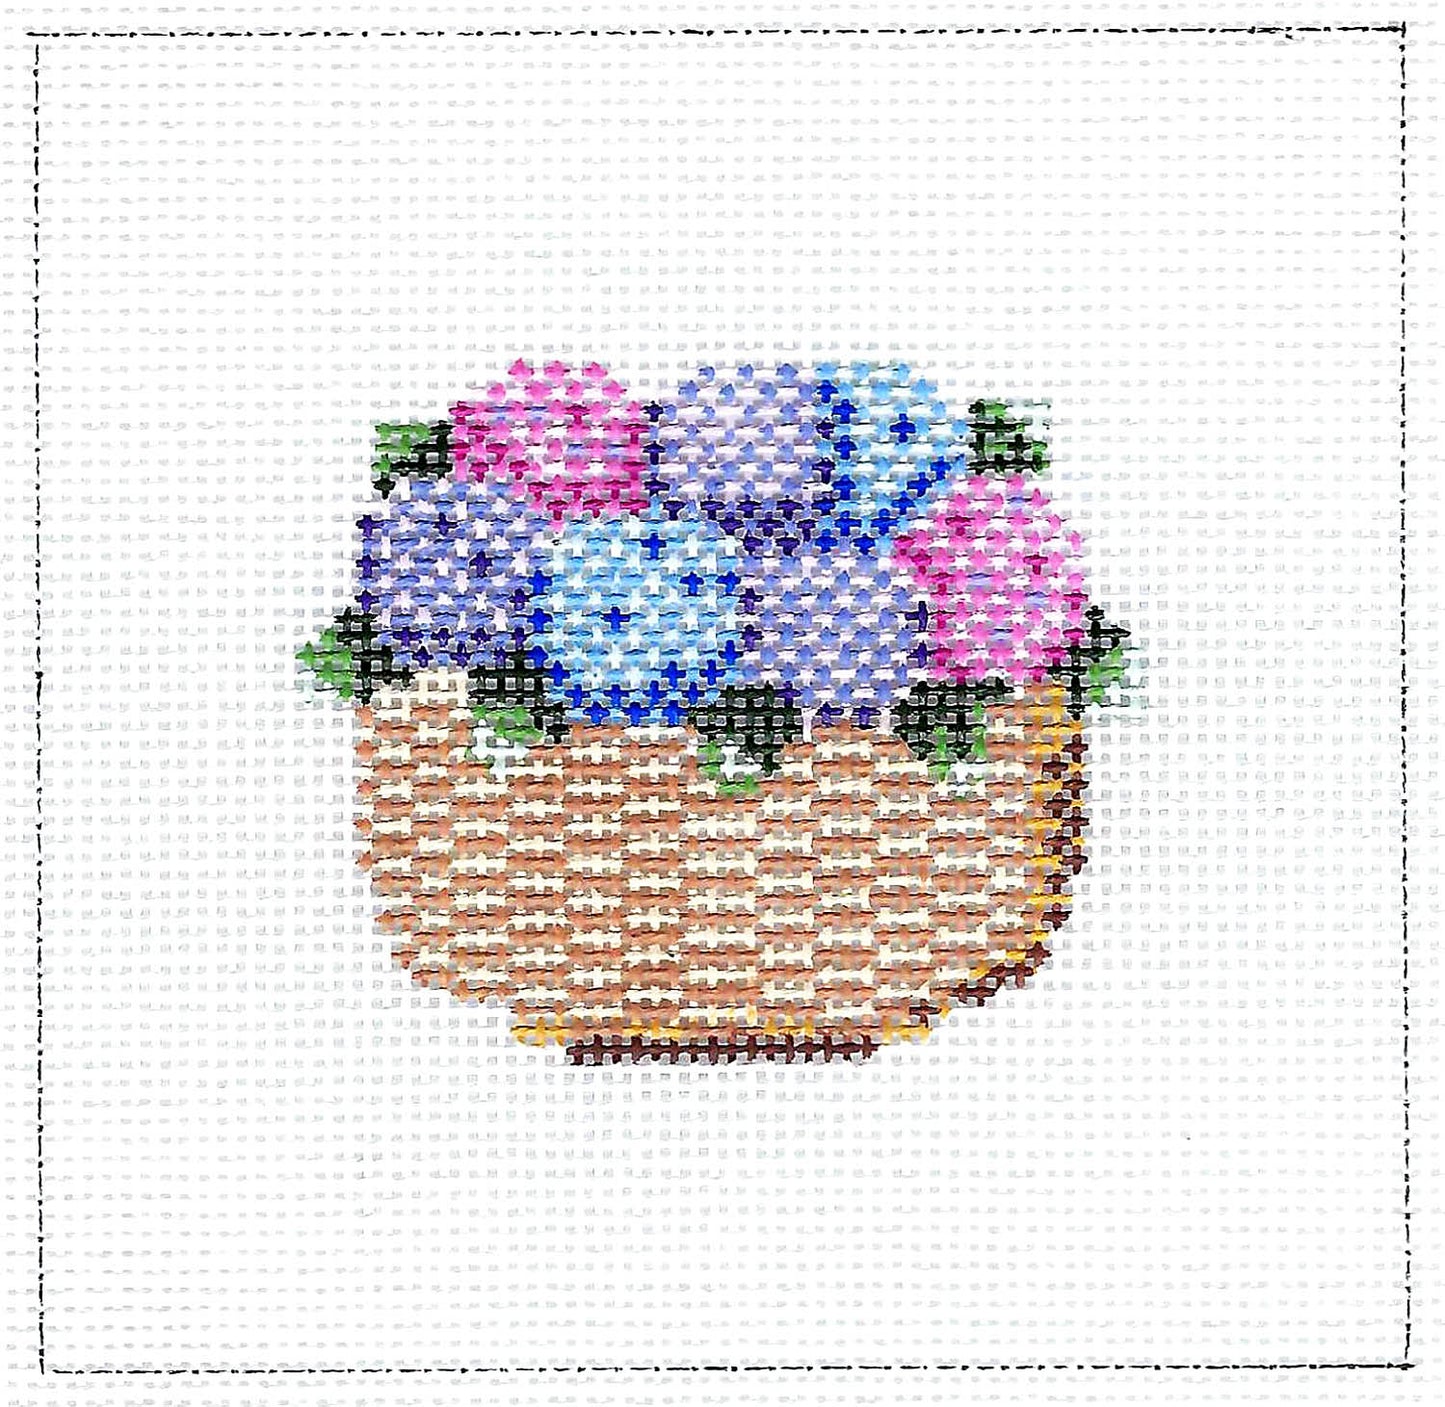 Nantucket Canvas ~ Nantucket Basket of Blue, Pink and Purple Hydrangea COASTER in a 4" square design by MBM Designs